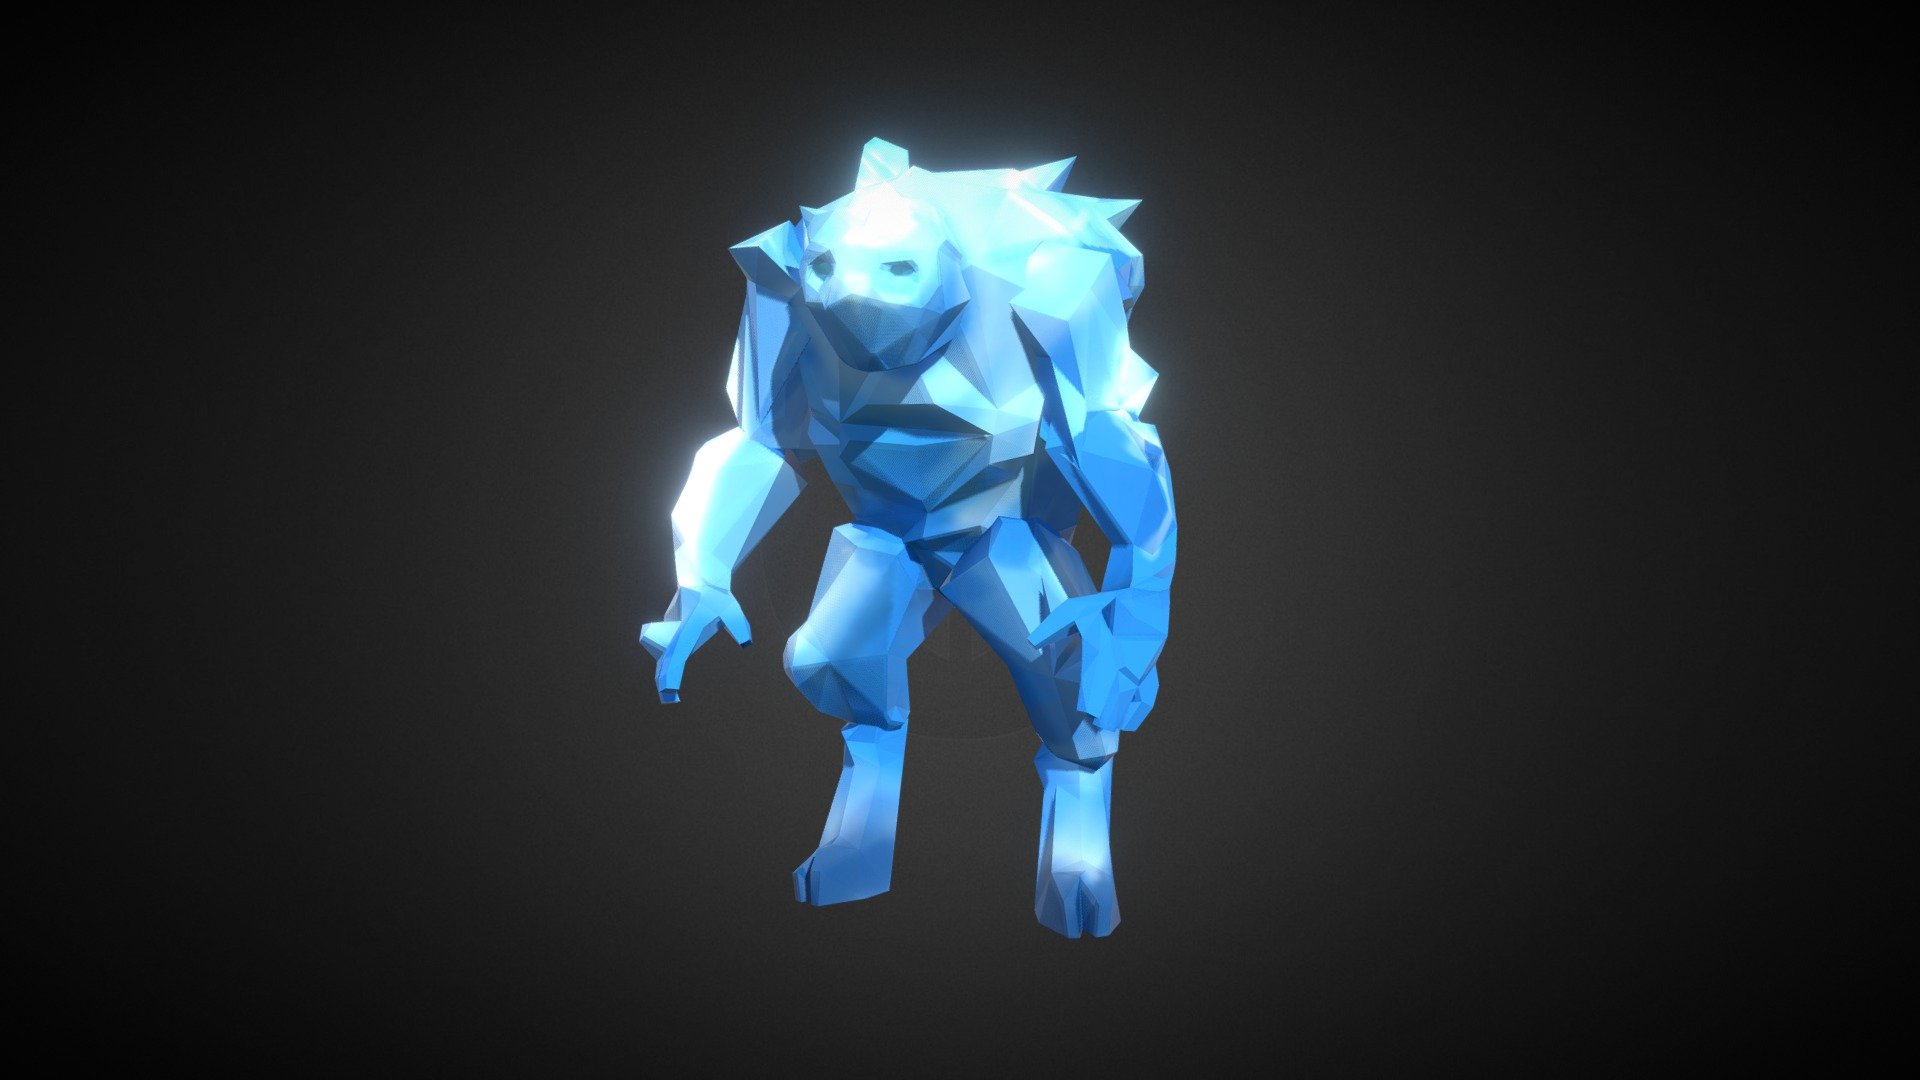 Generic low-poly game character with custom hand-painted base texture. All modeling, texturing rig and animation done in Blender 3d model